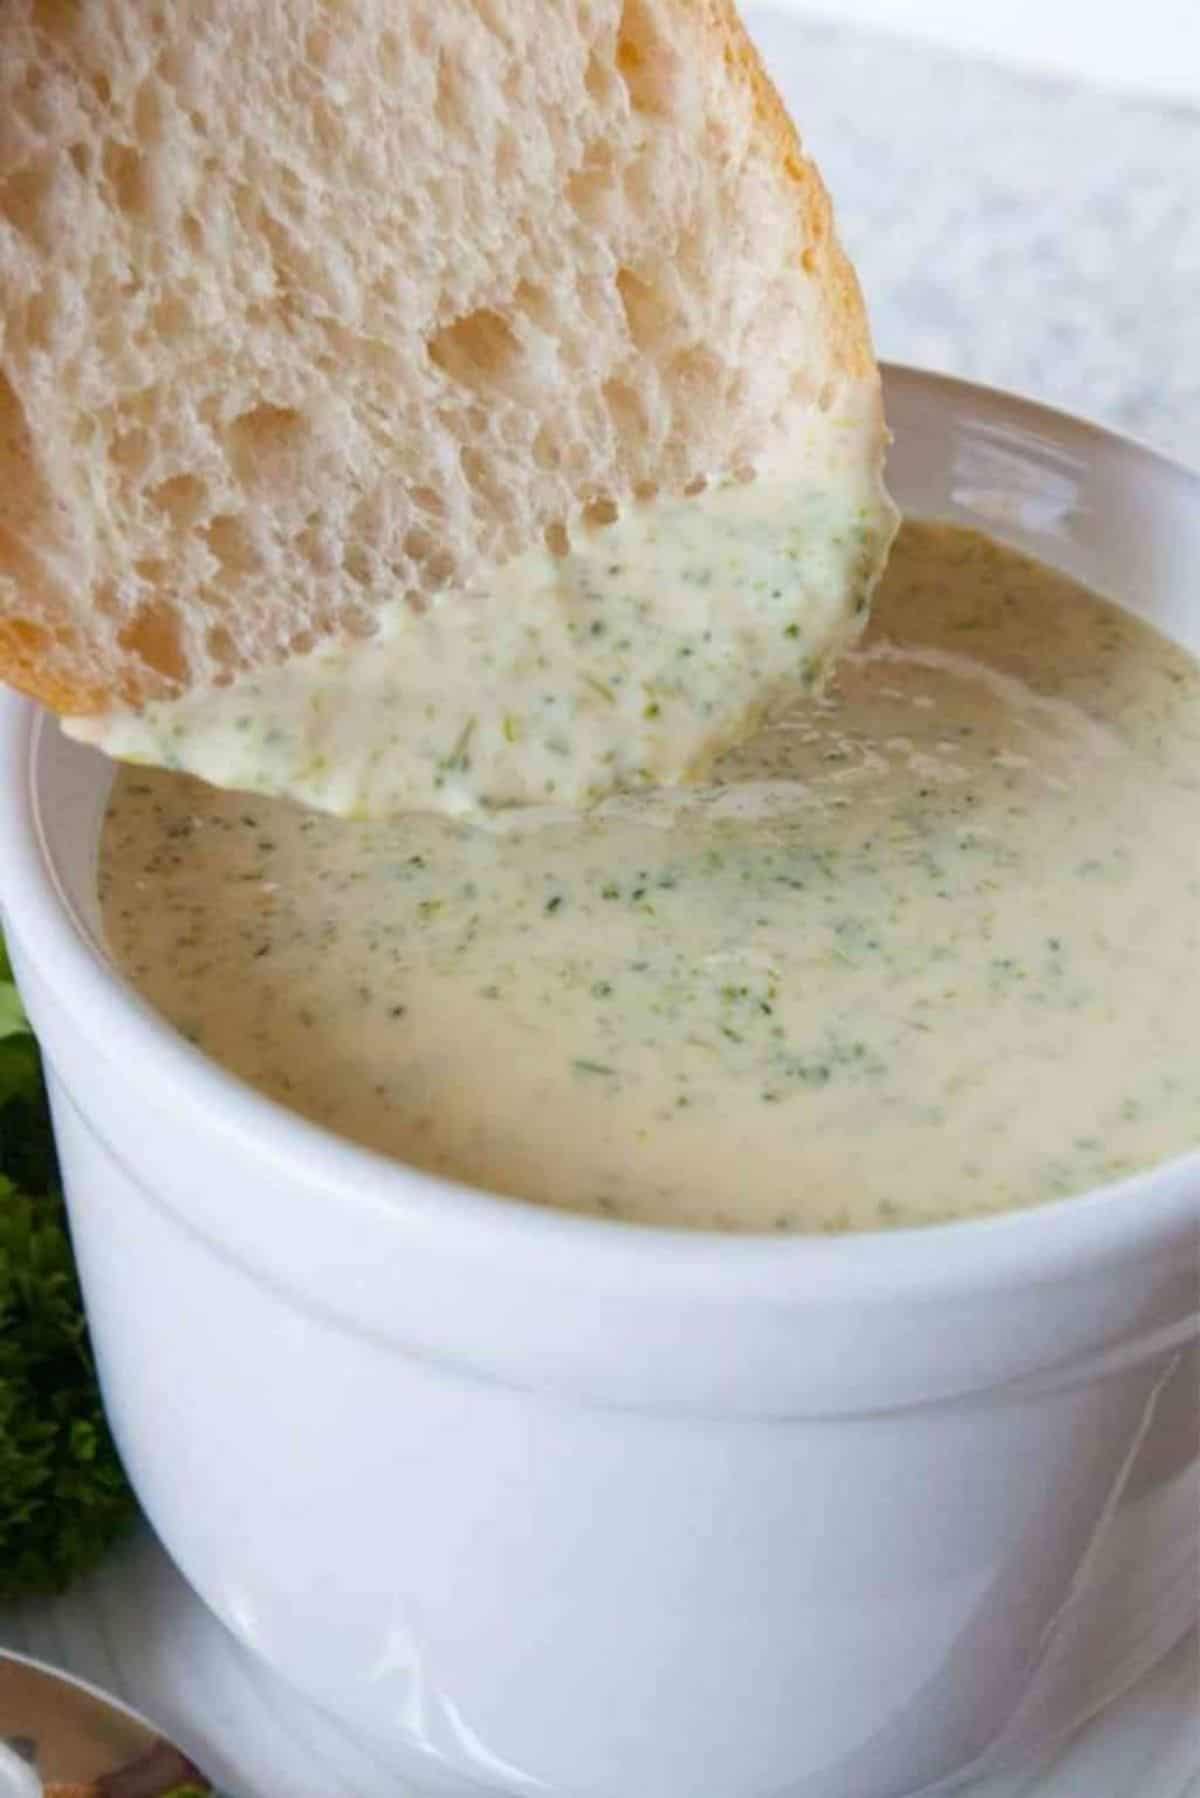 A slice od bread dipped in a bowl of Broccoli Cheese Soup.